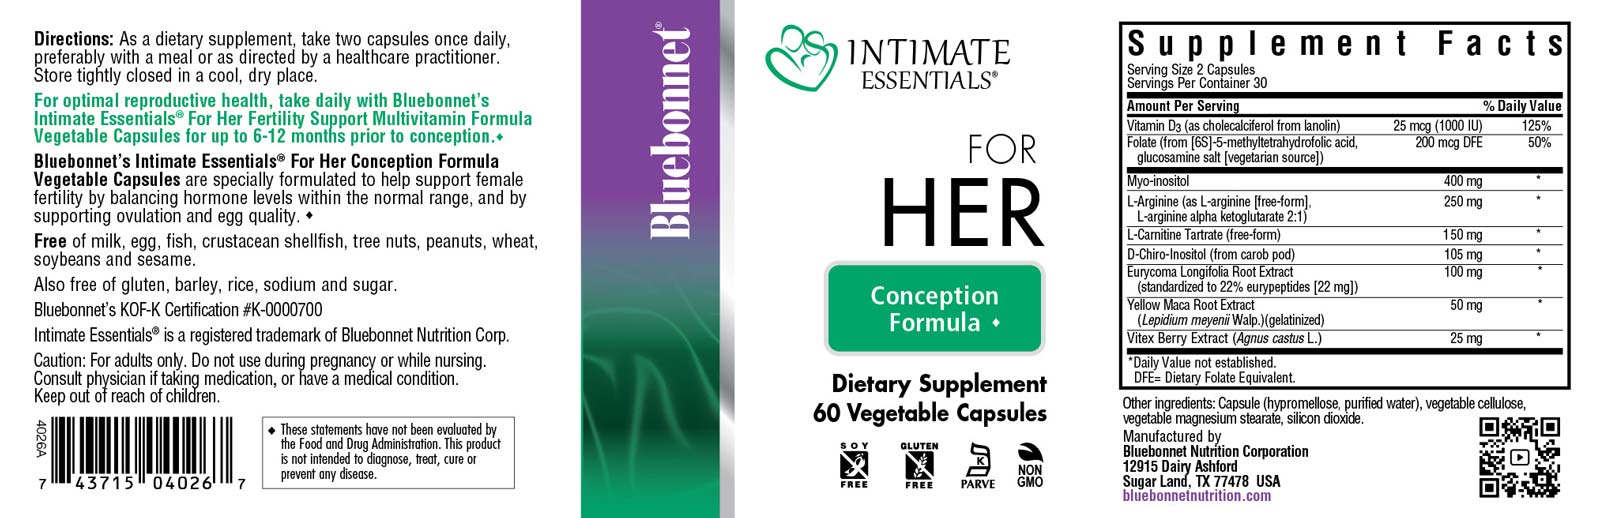 INTIMATE ESSENTIALS® CONCEPTION FORMULA FOR Her, Vegetable capsules, Daily Nutrition for: Fertility support, Balance hormone levels, Support ovulation and egg quality #size_60 count